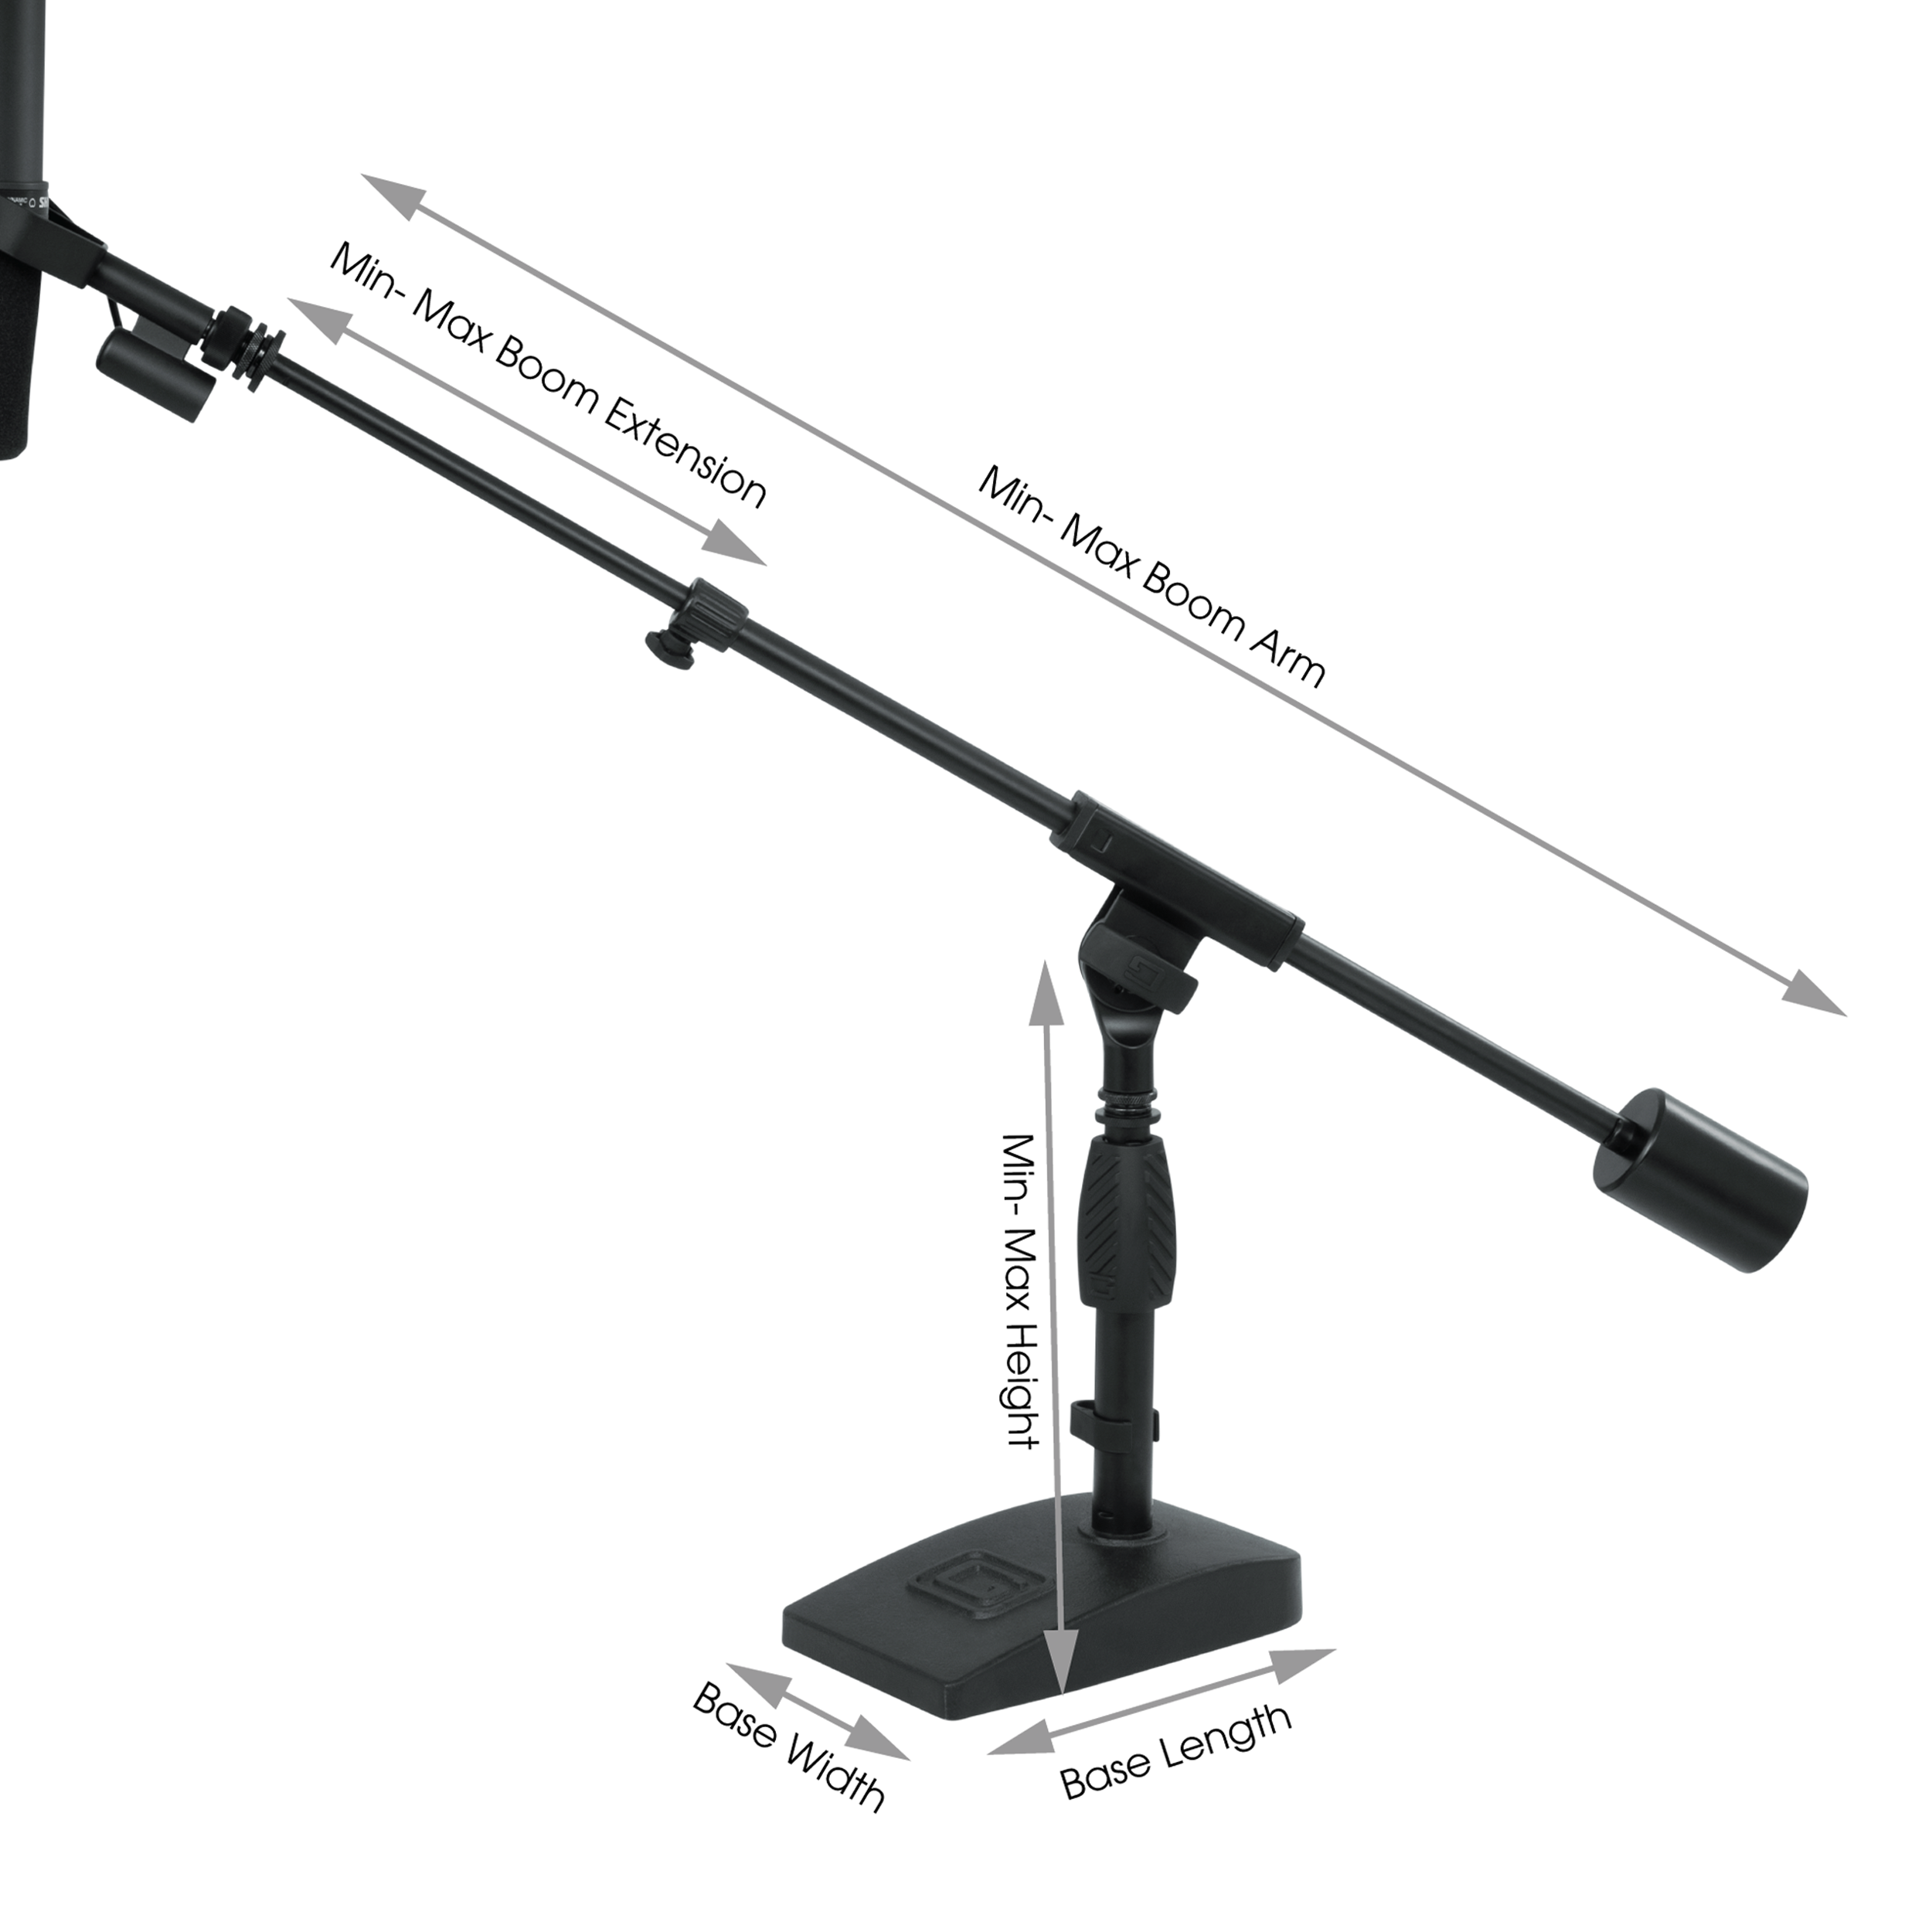 Gator Telescoping Boom Mic Stand For Podcasting, Drums And Guitar Amps